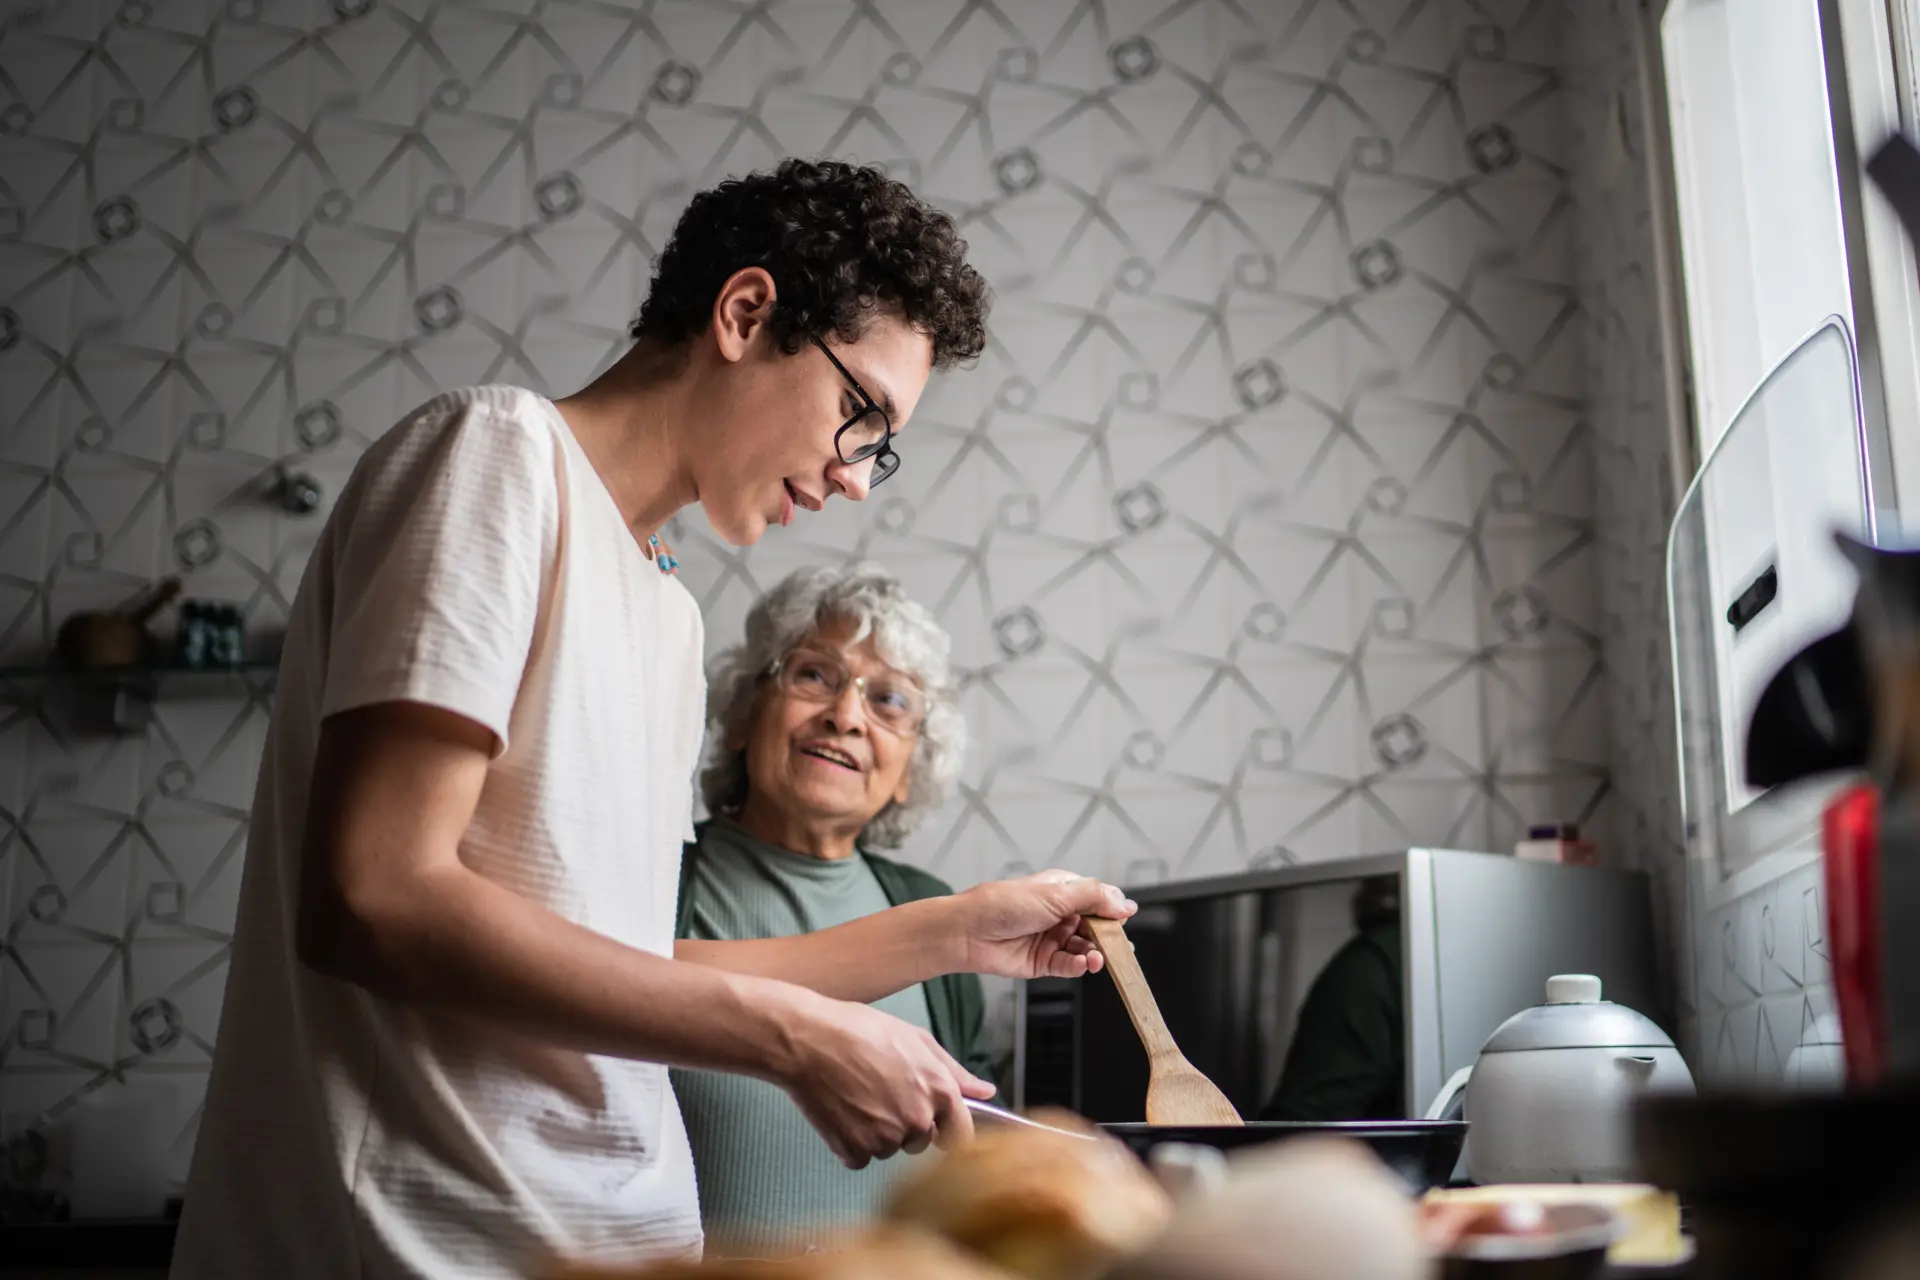 Man partnering up with his grandma in the kitchen